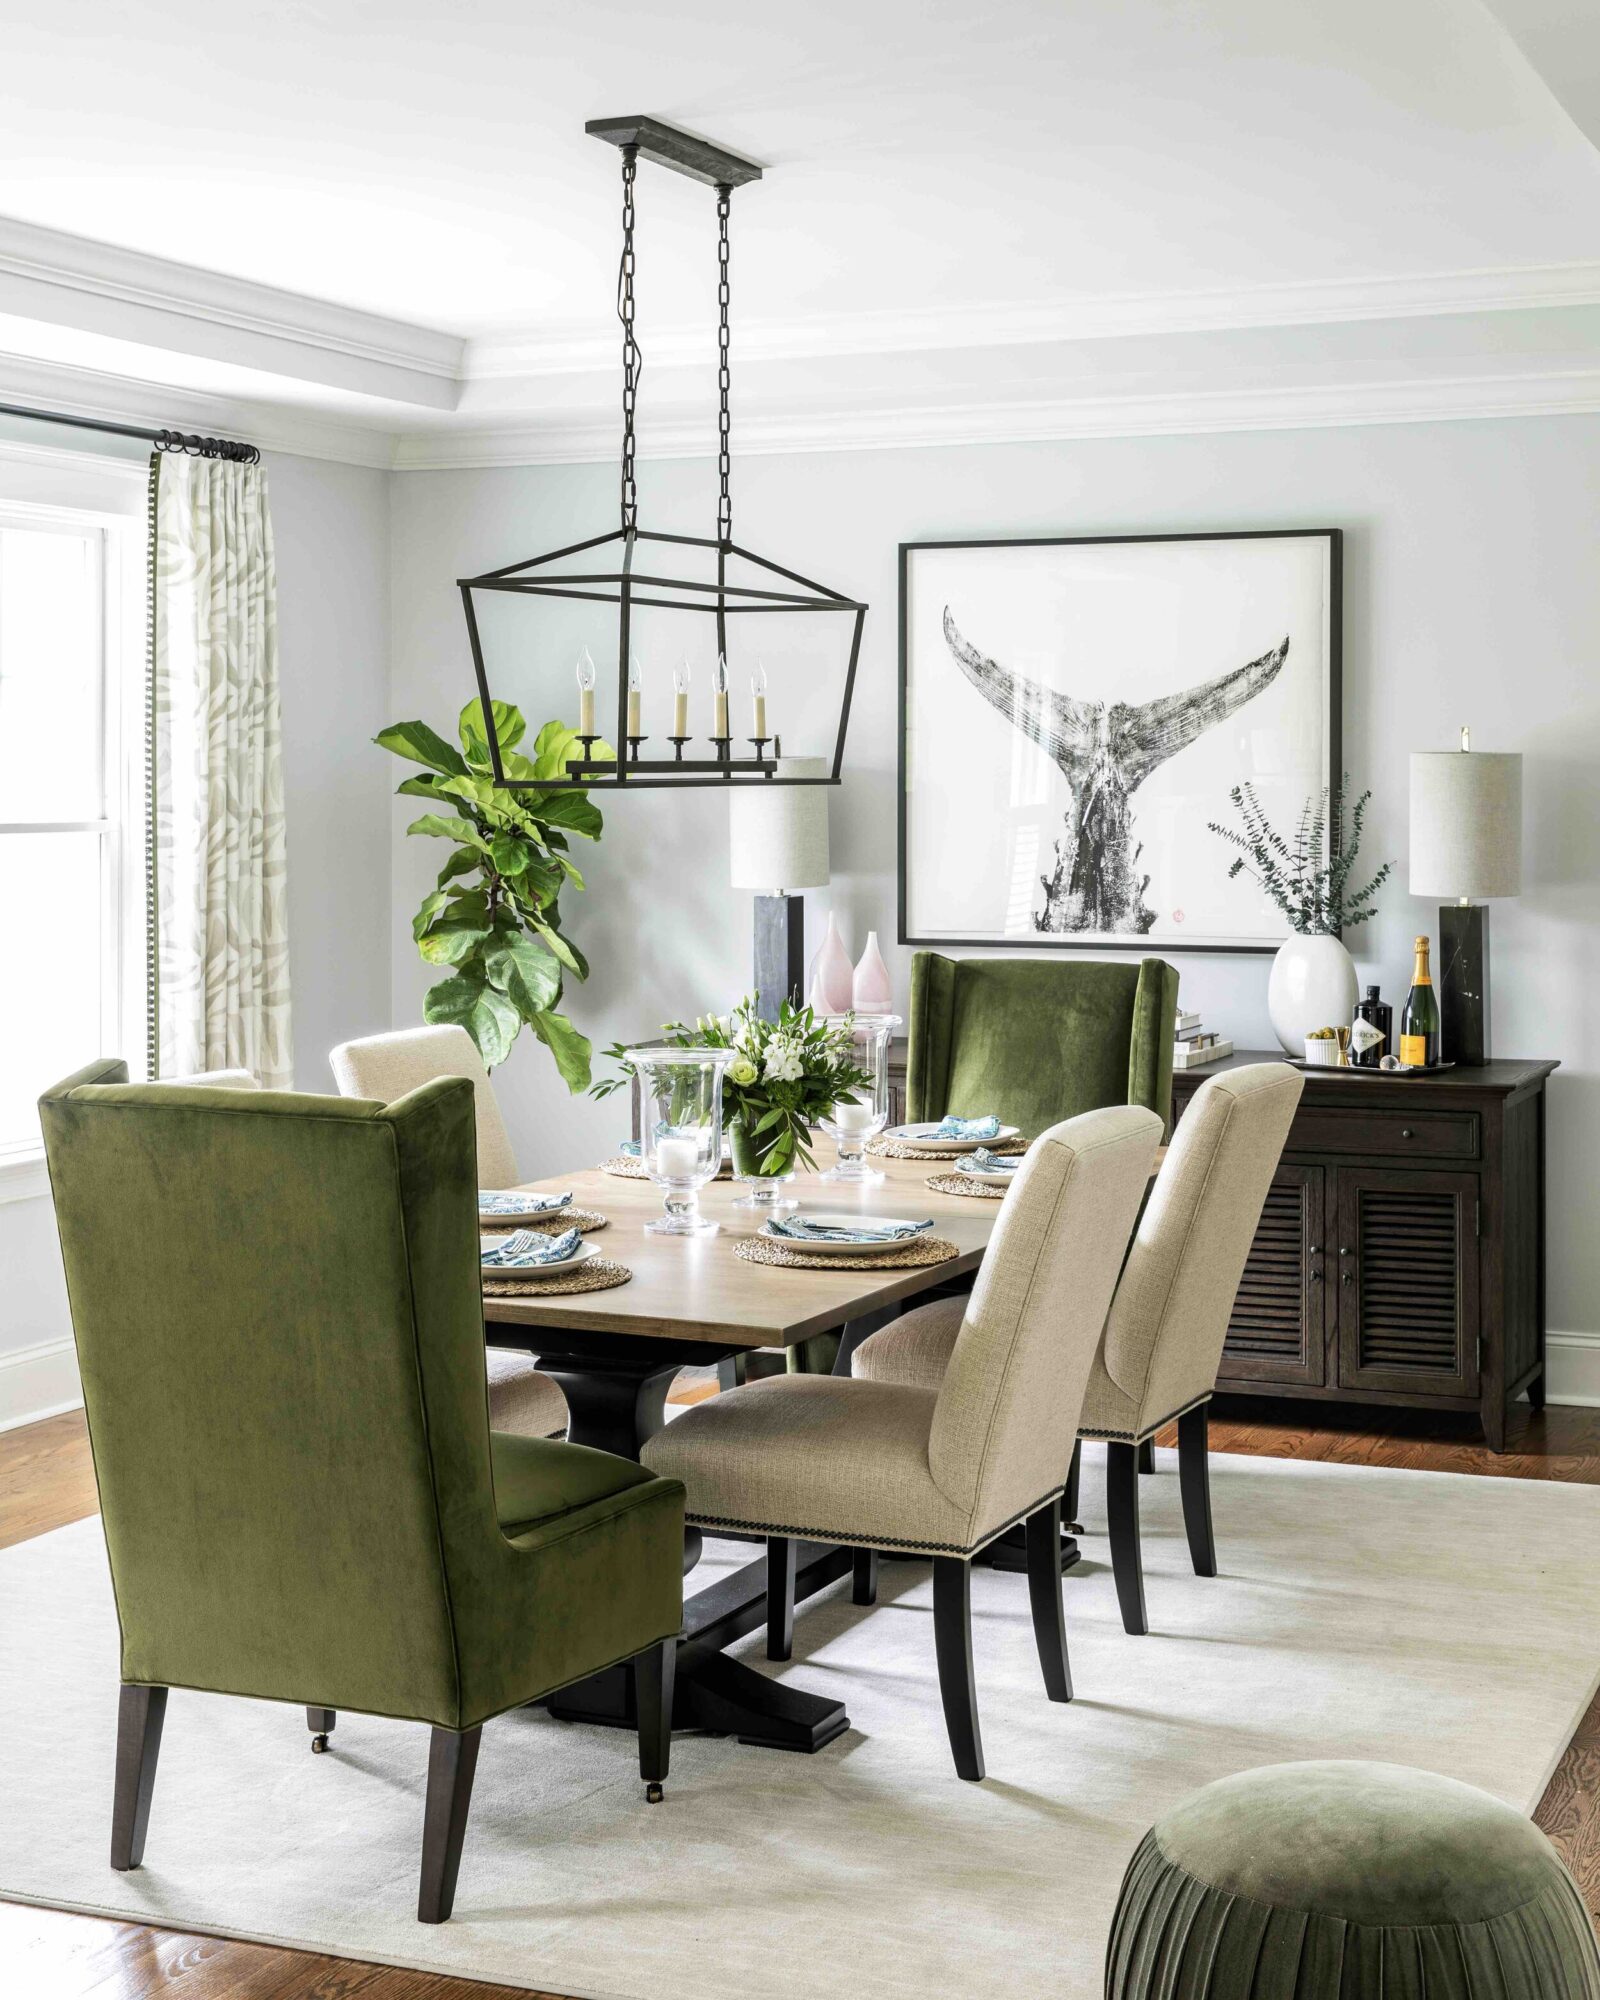 Luscious green furnishings and botanical elements bring the outside in. Fish tail artwork by Peter VanDingstee. Design by Laura Pierce.